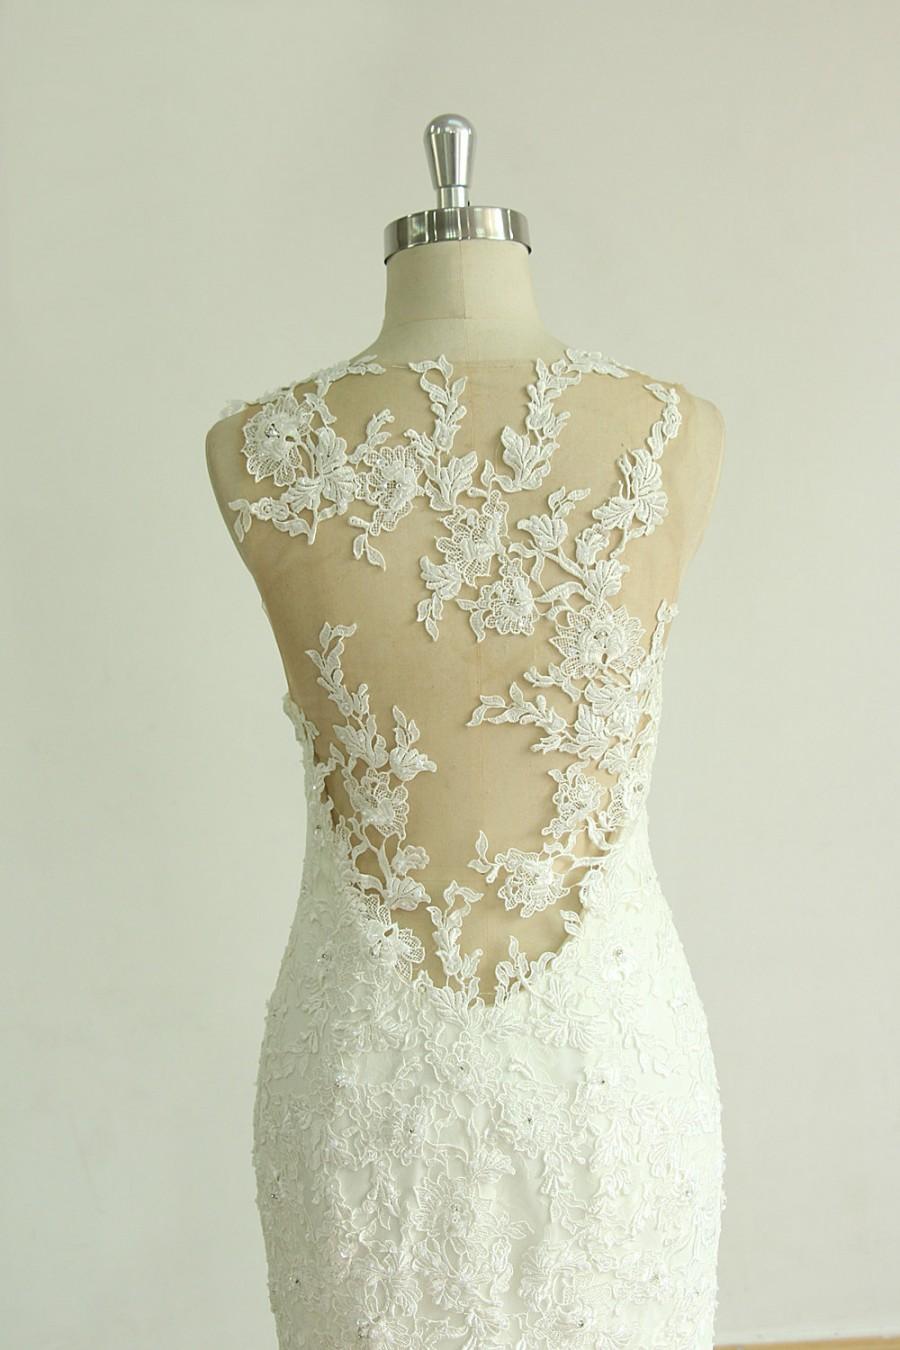 Mariage - Very elegant ivory Fit and flare lace wedding dress,formal wedding dress